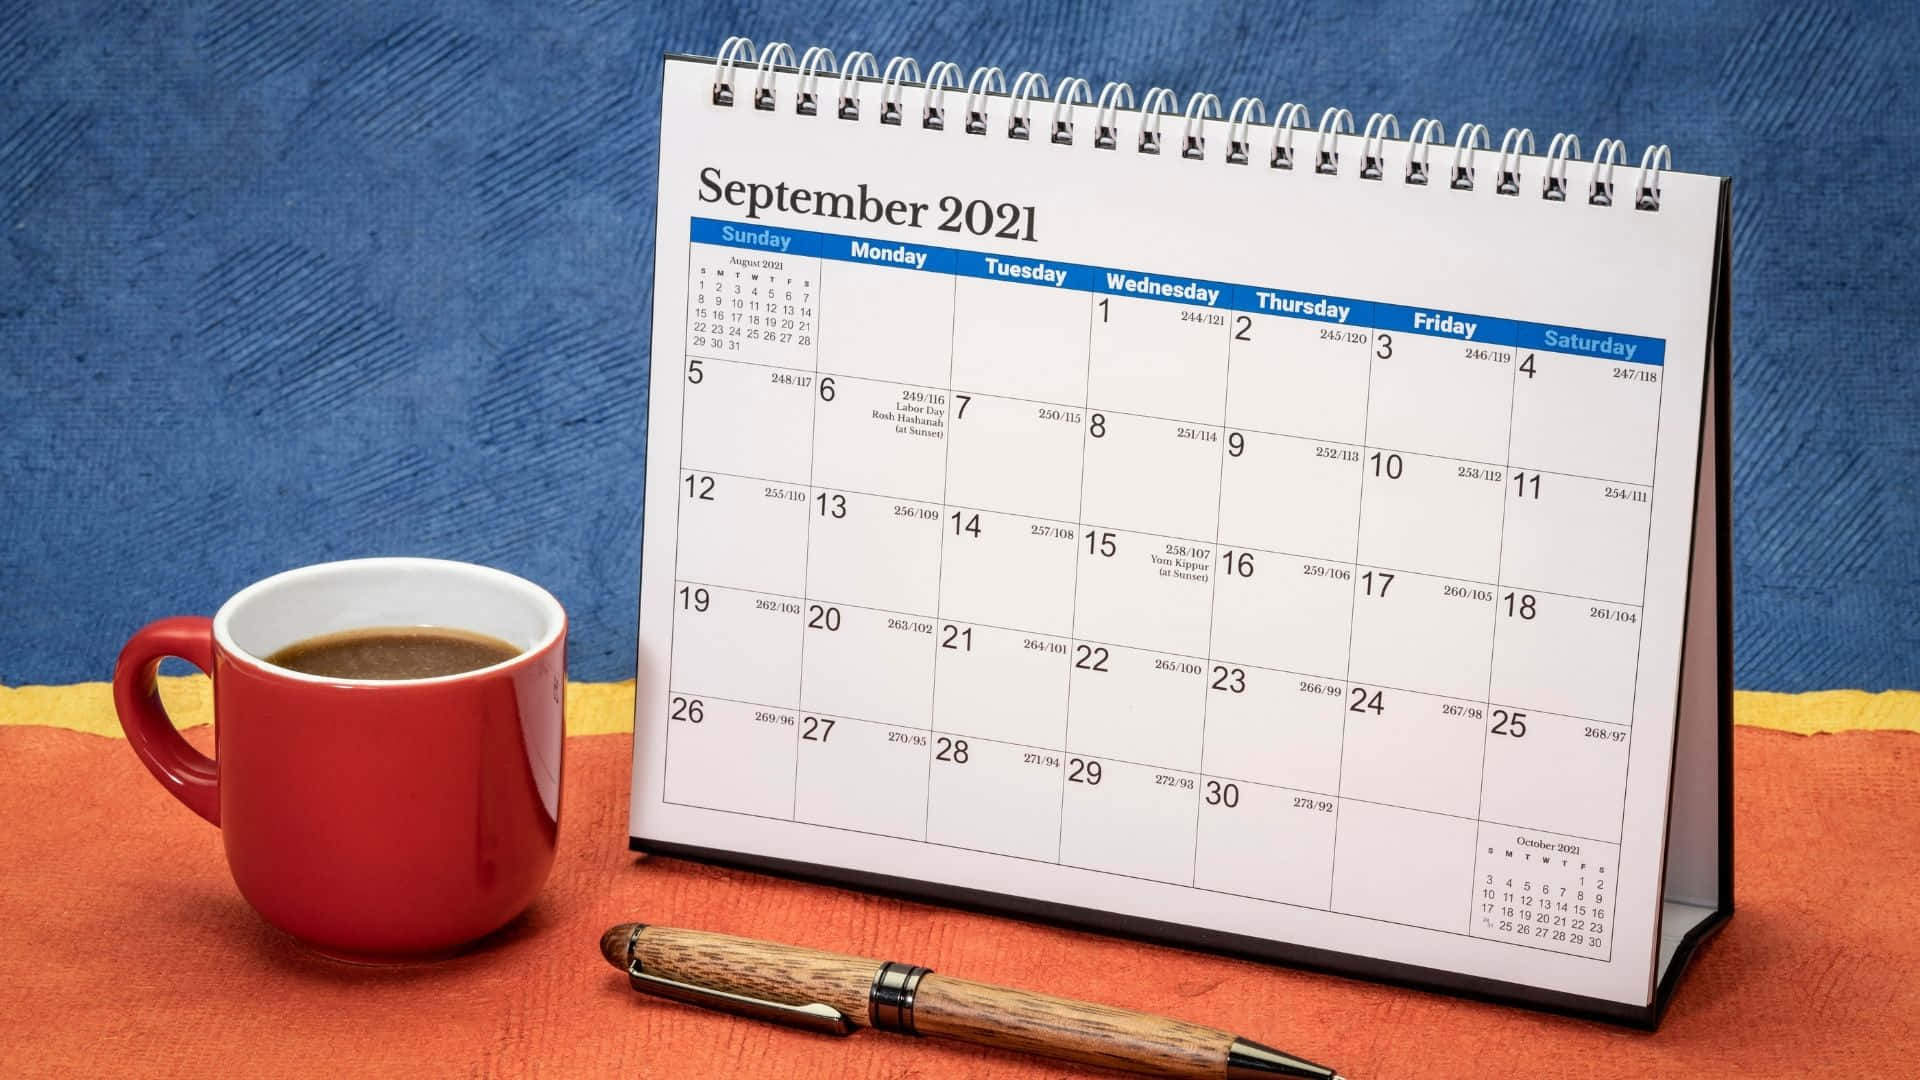 Keep Track Of Your Schedule With This September 2021 Calendar Wallpaper